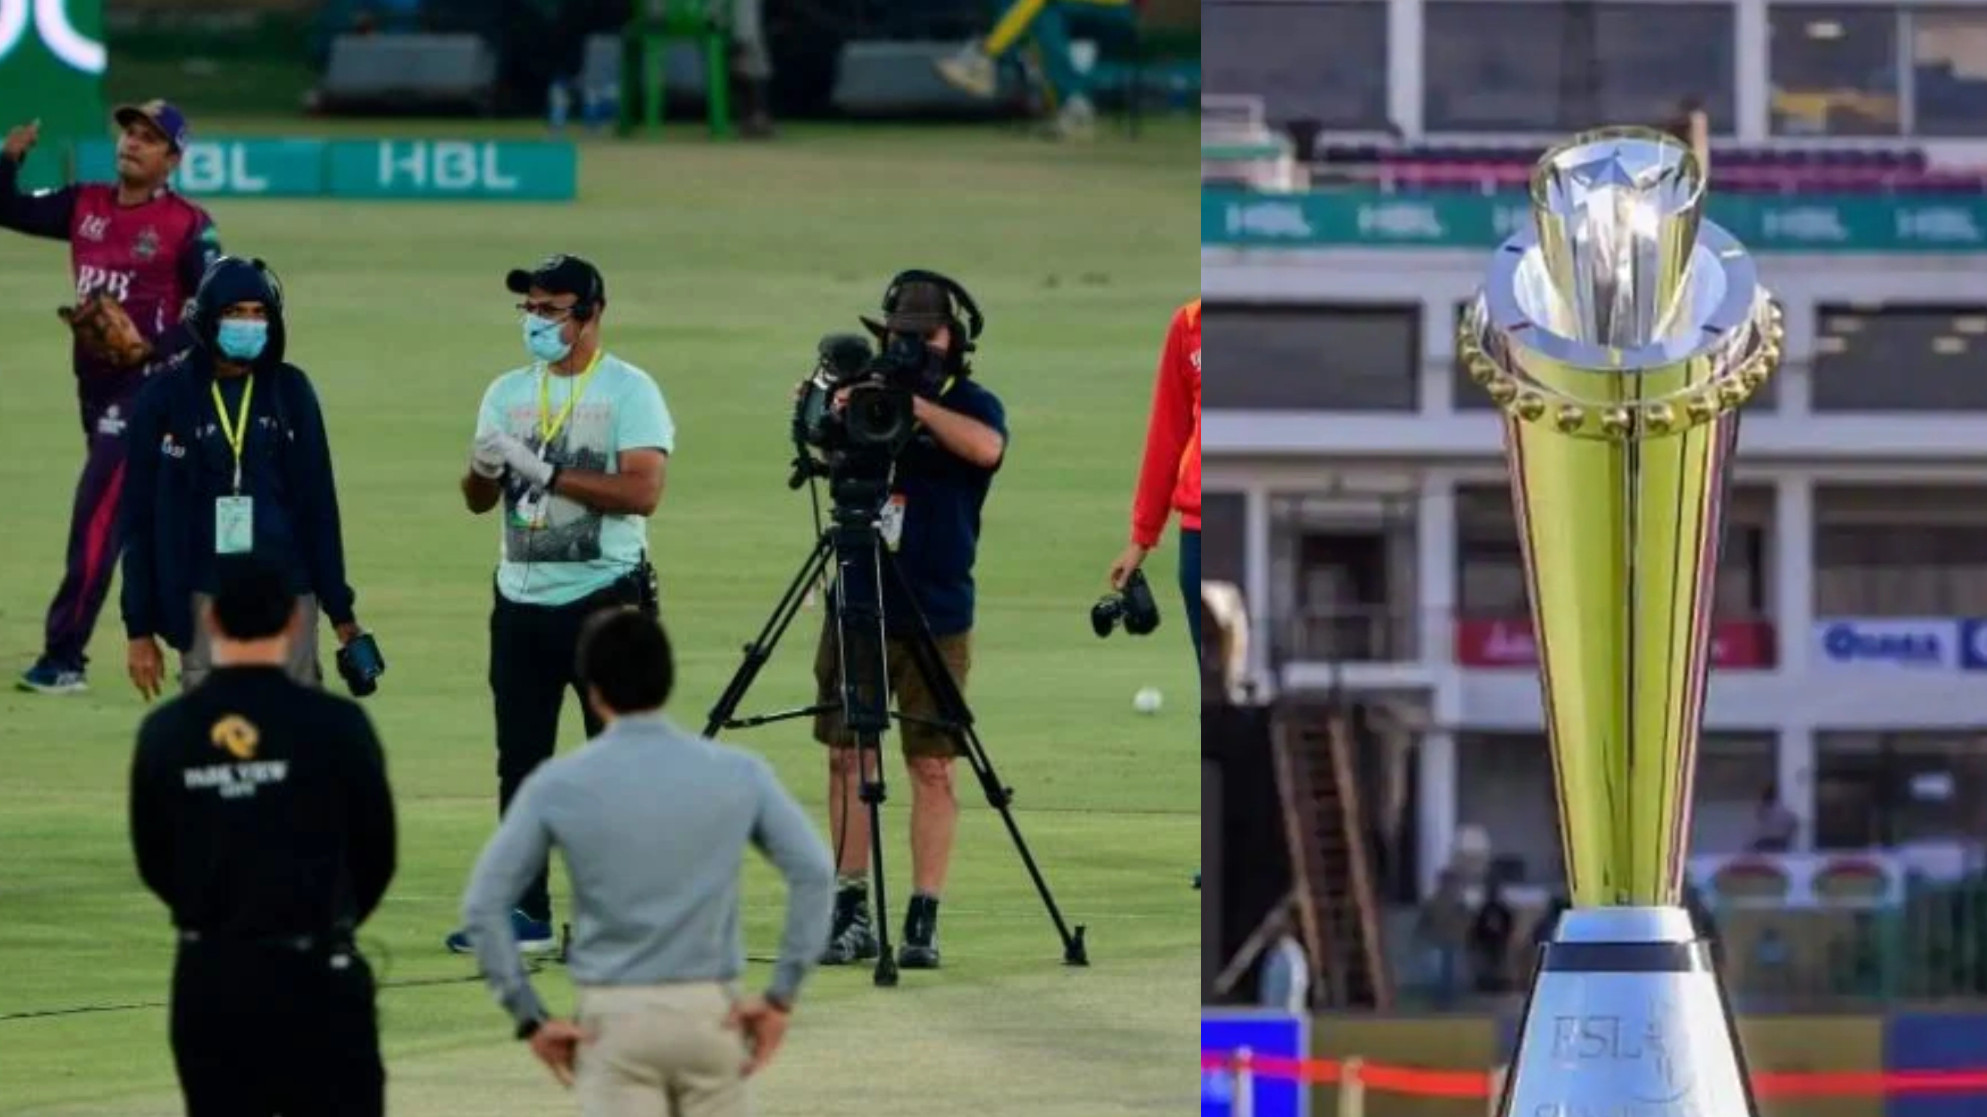 PSL’s Indian broadcasting team yet to get clearance from Abu Dhabi authorities, confirms PCB